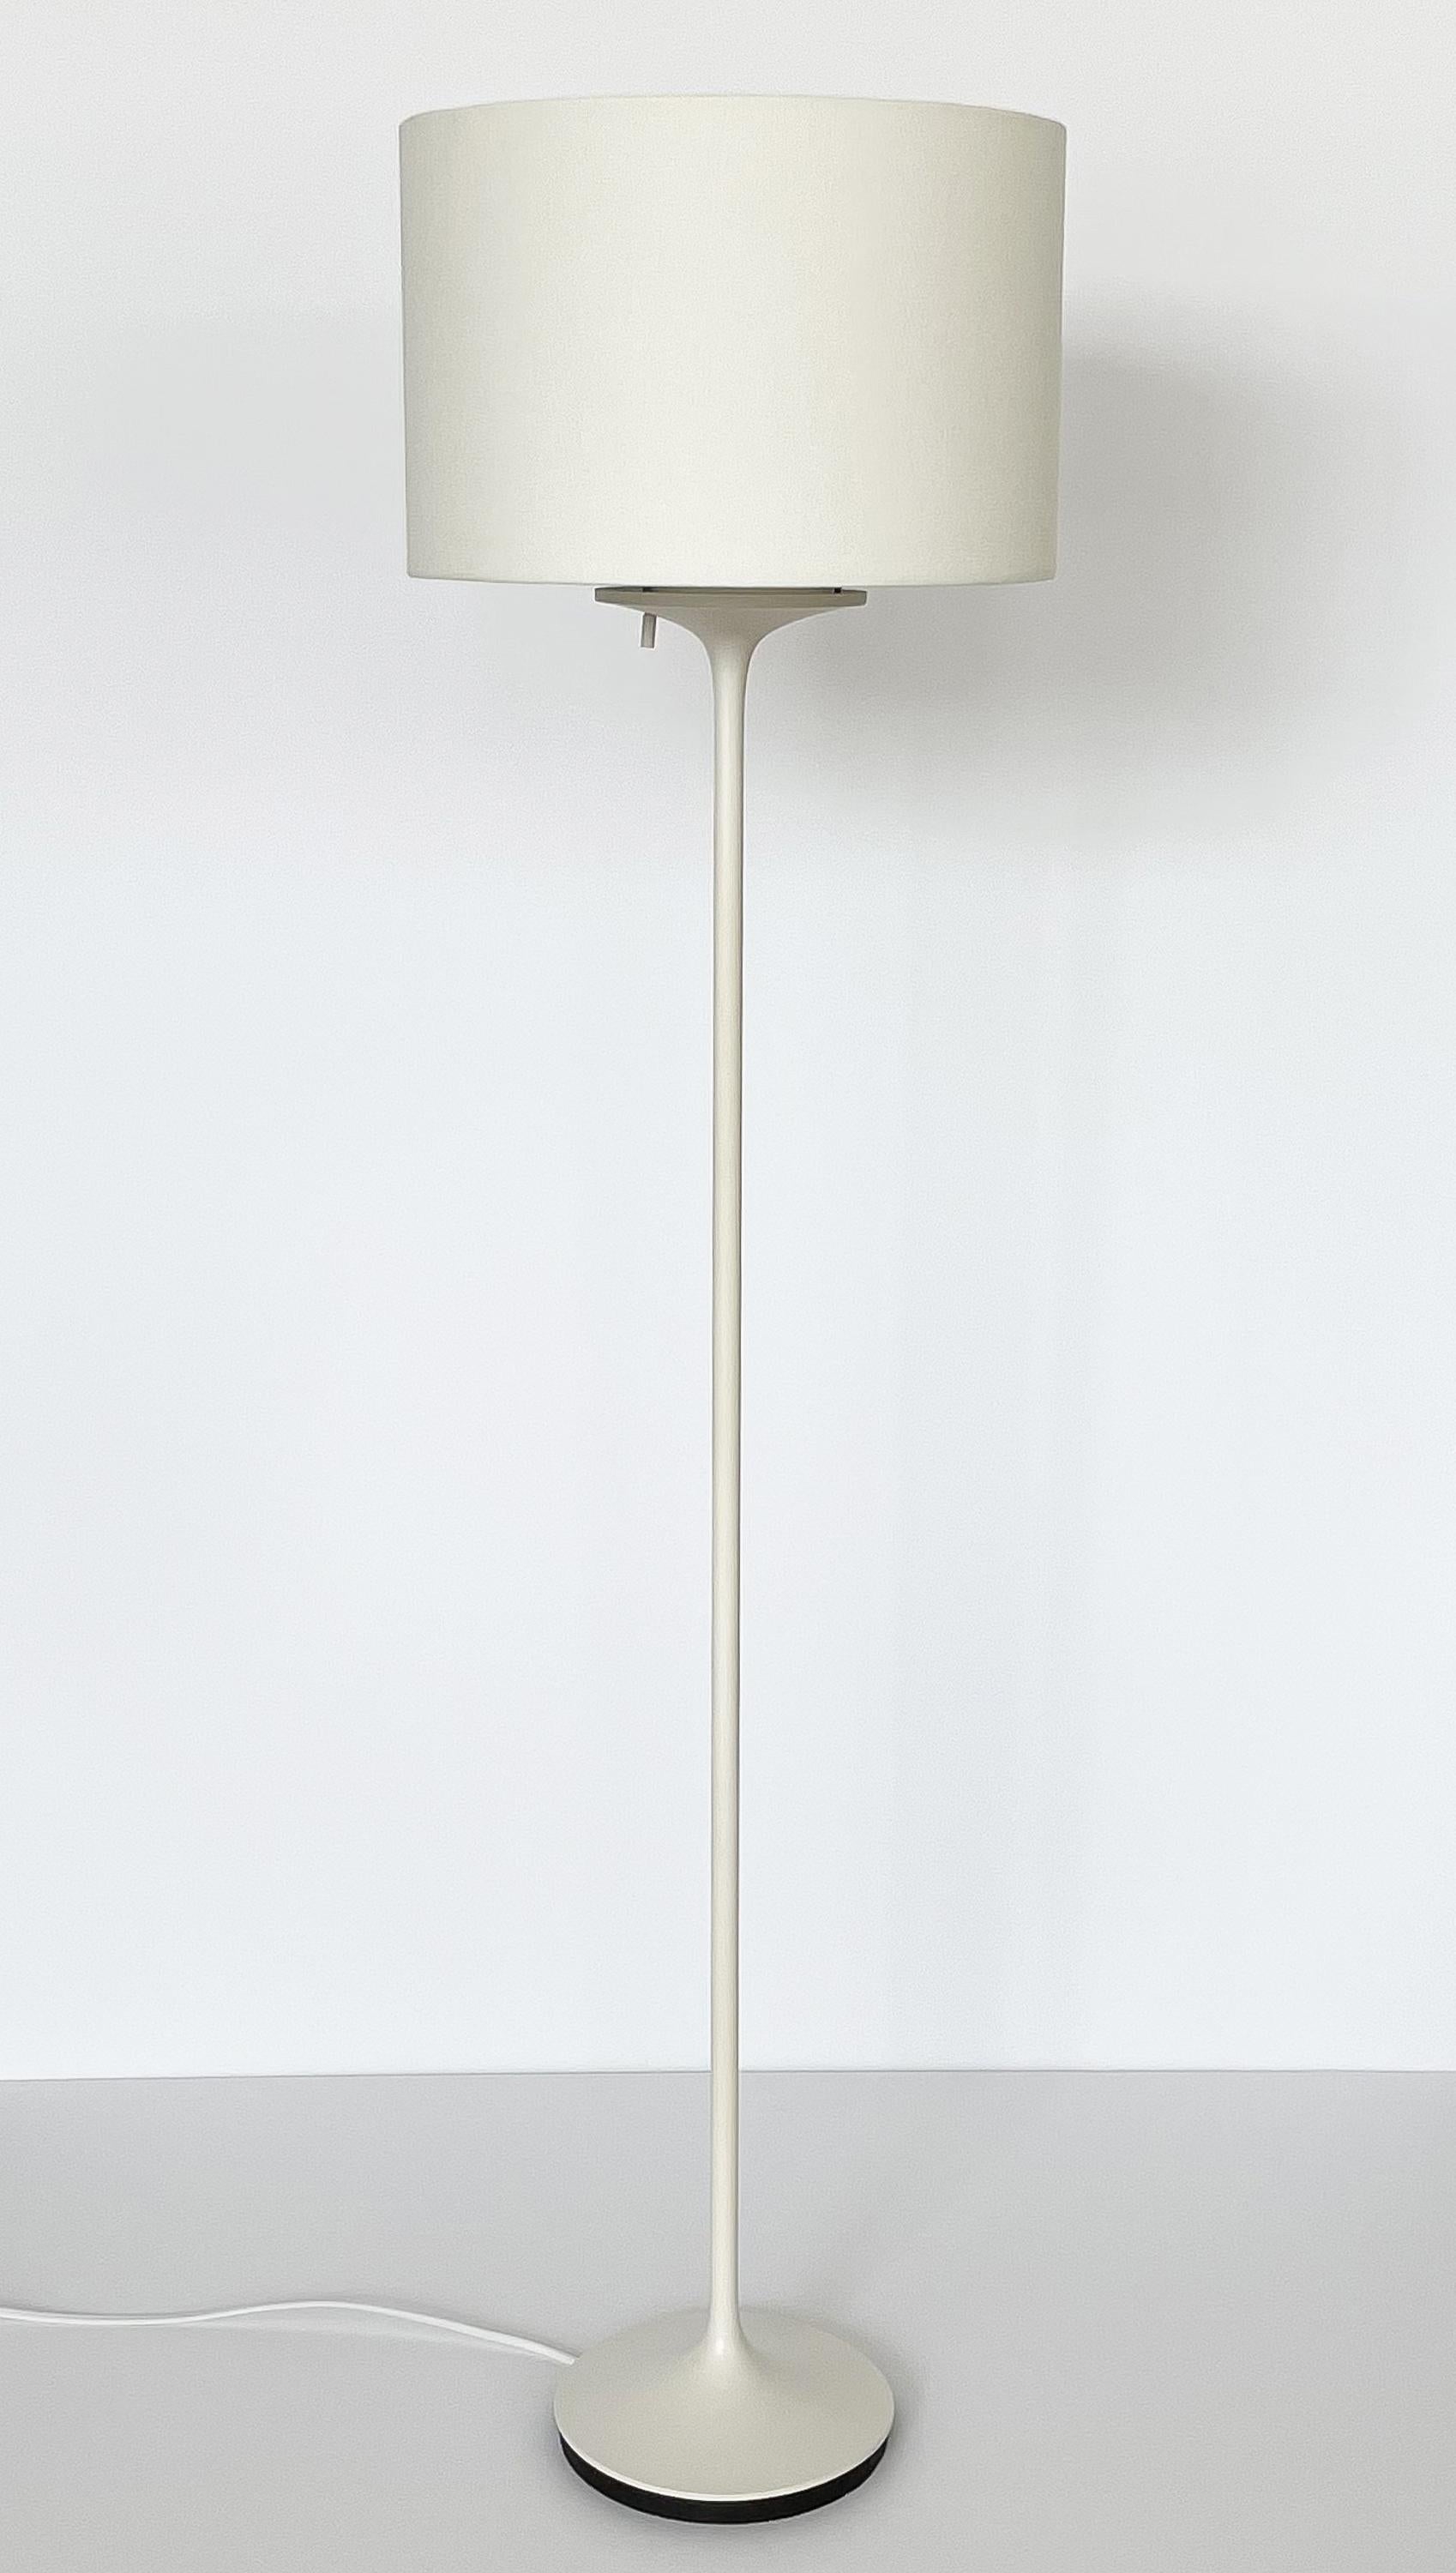 Pair of white Stemlite floor lamp by Bill Curry for Design Line, circa 1960s. Model D-7. Tulip shaped bases are die cast, machined and handcrafted to form an elegant seamless contour. Coordinating white linen shades are capped with a white